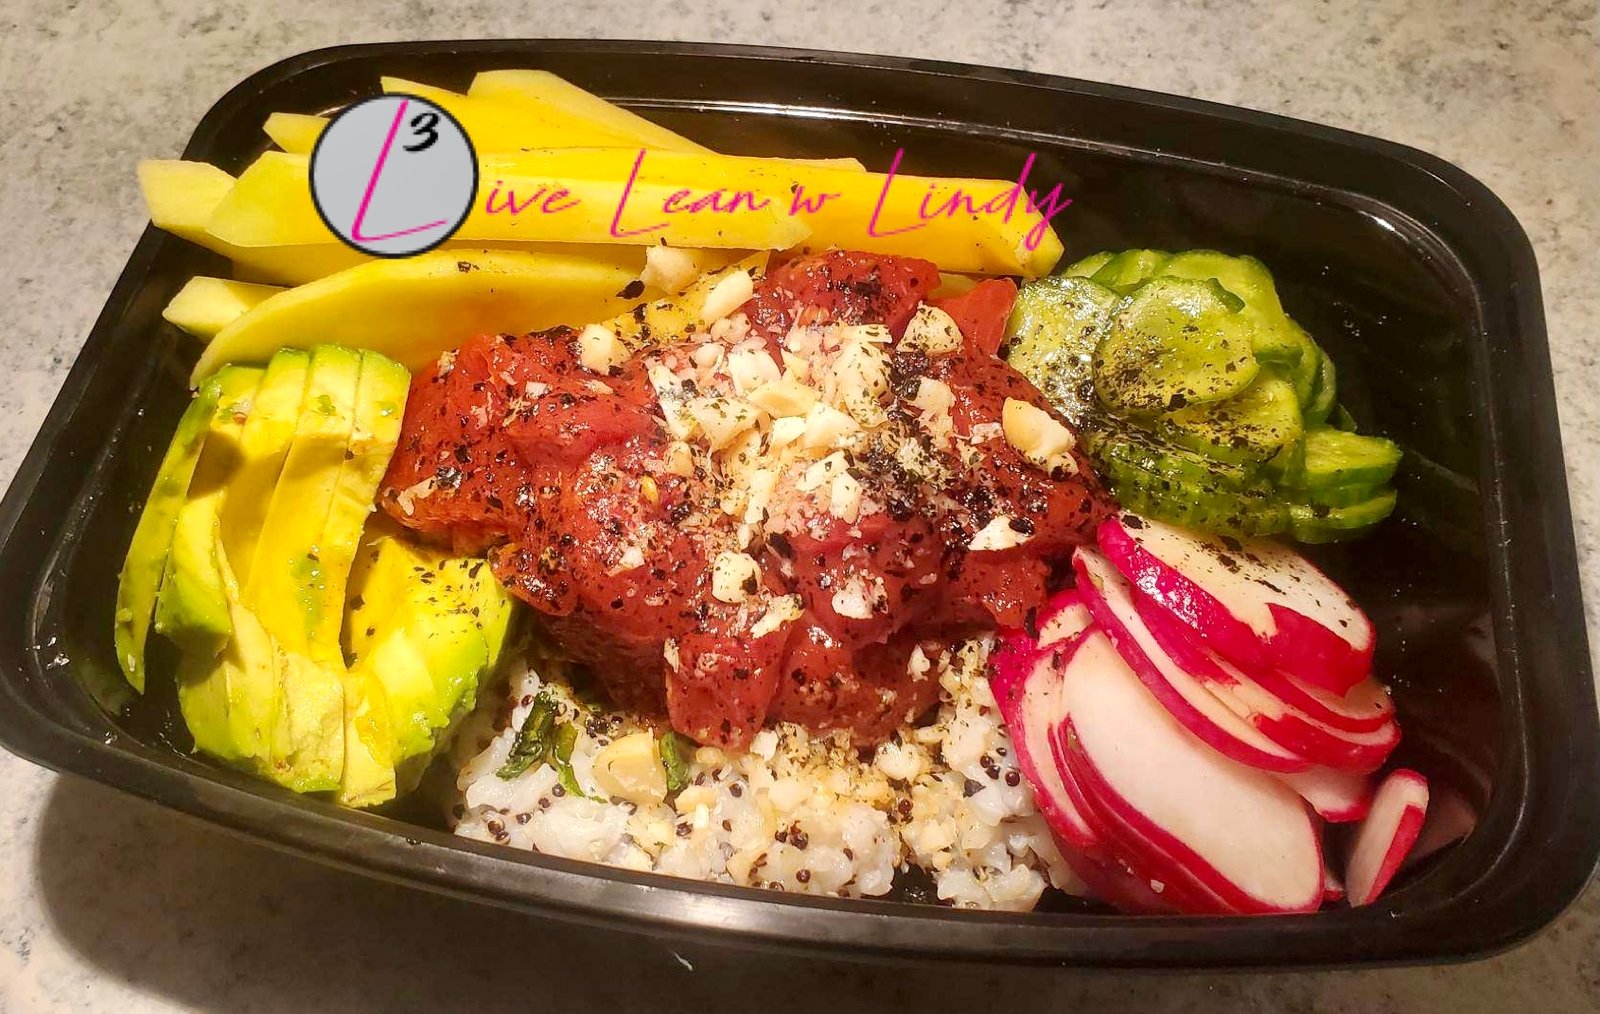 This is a recipe that is perfect to dish out in a to-go container and take with you on the go!